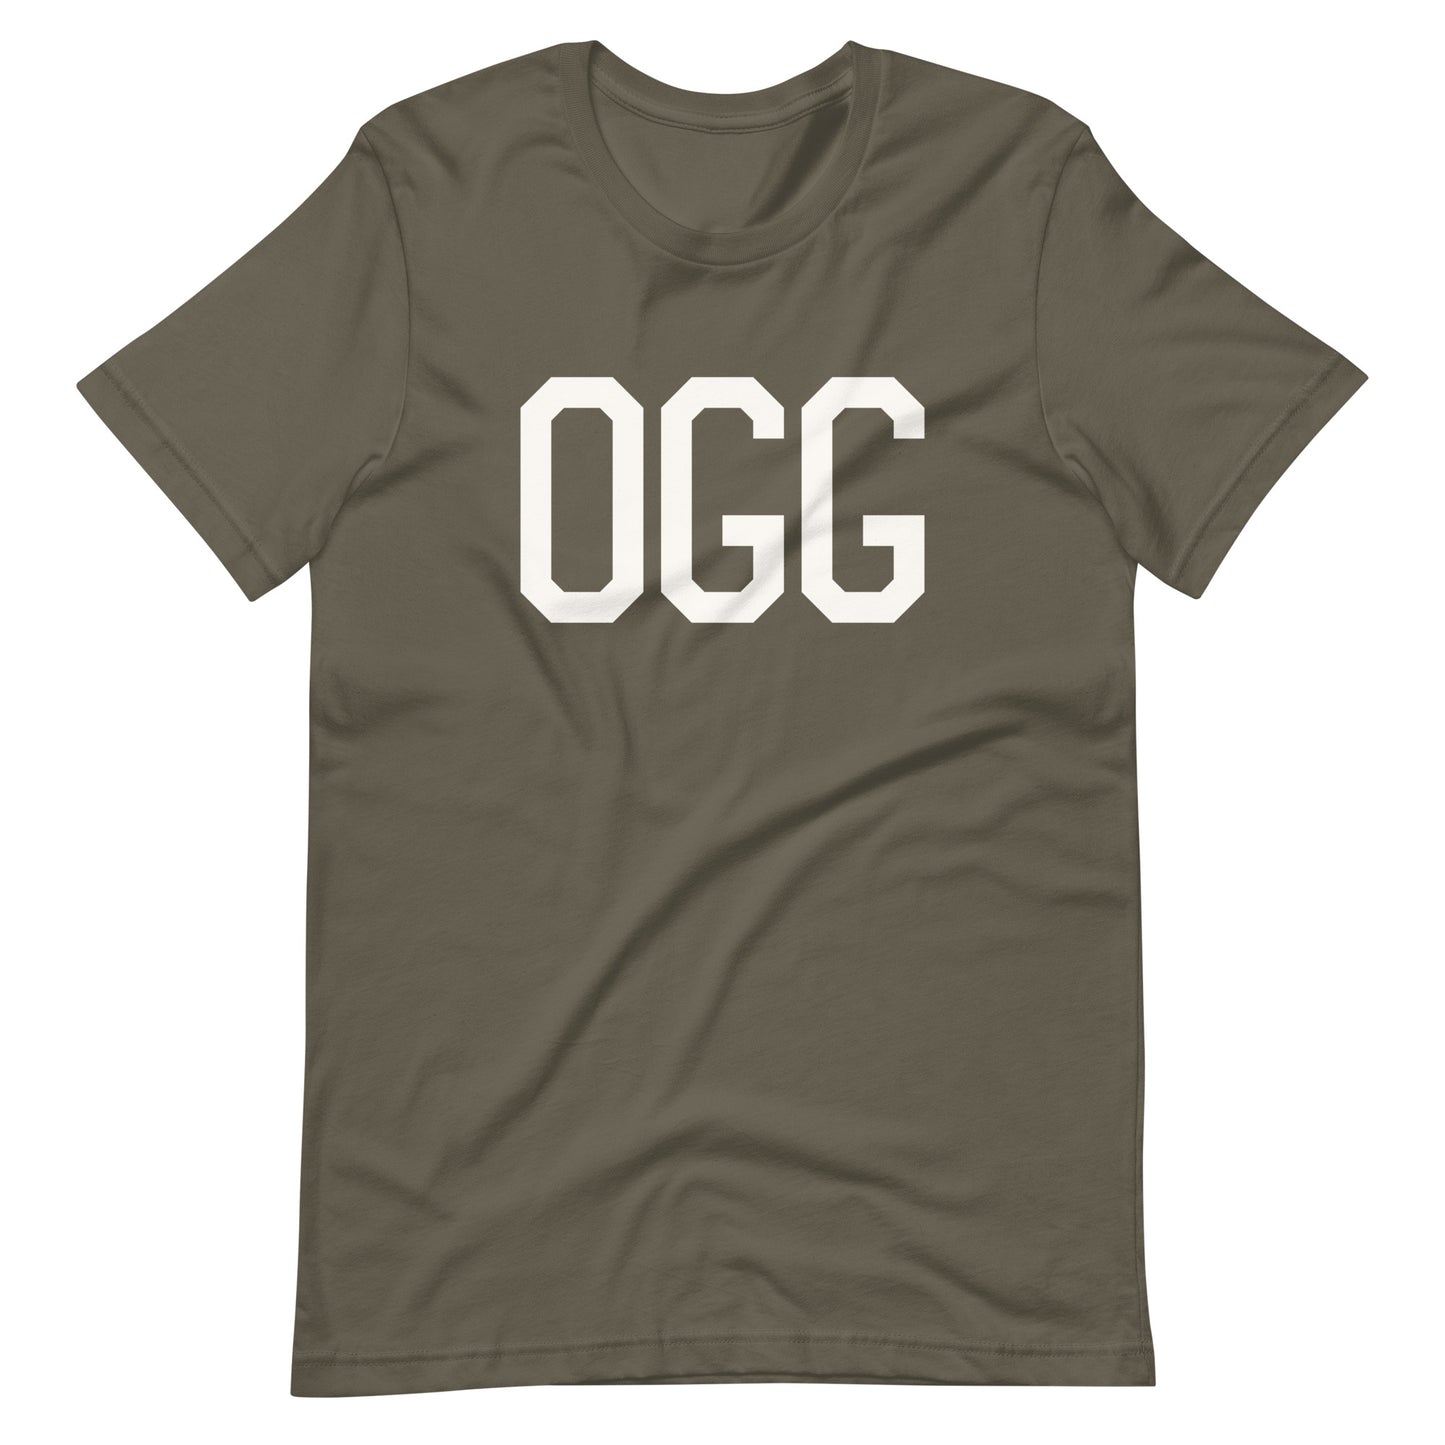 Airport Code T-Shirt - White Graphic • OGG Maui • YHM Designs - Image 04